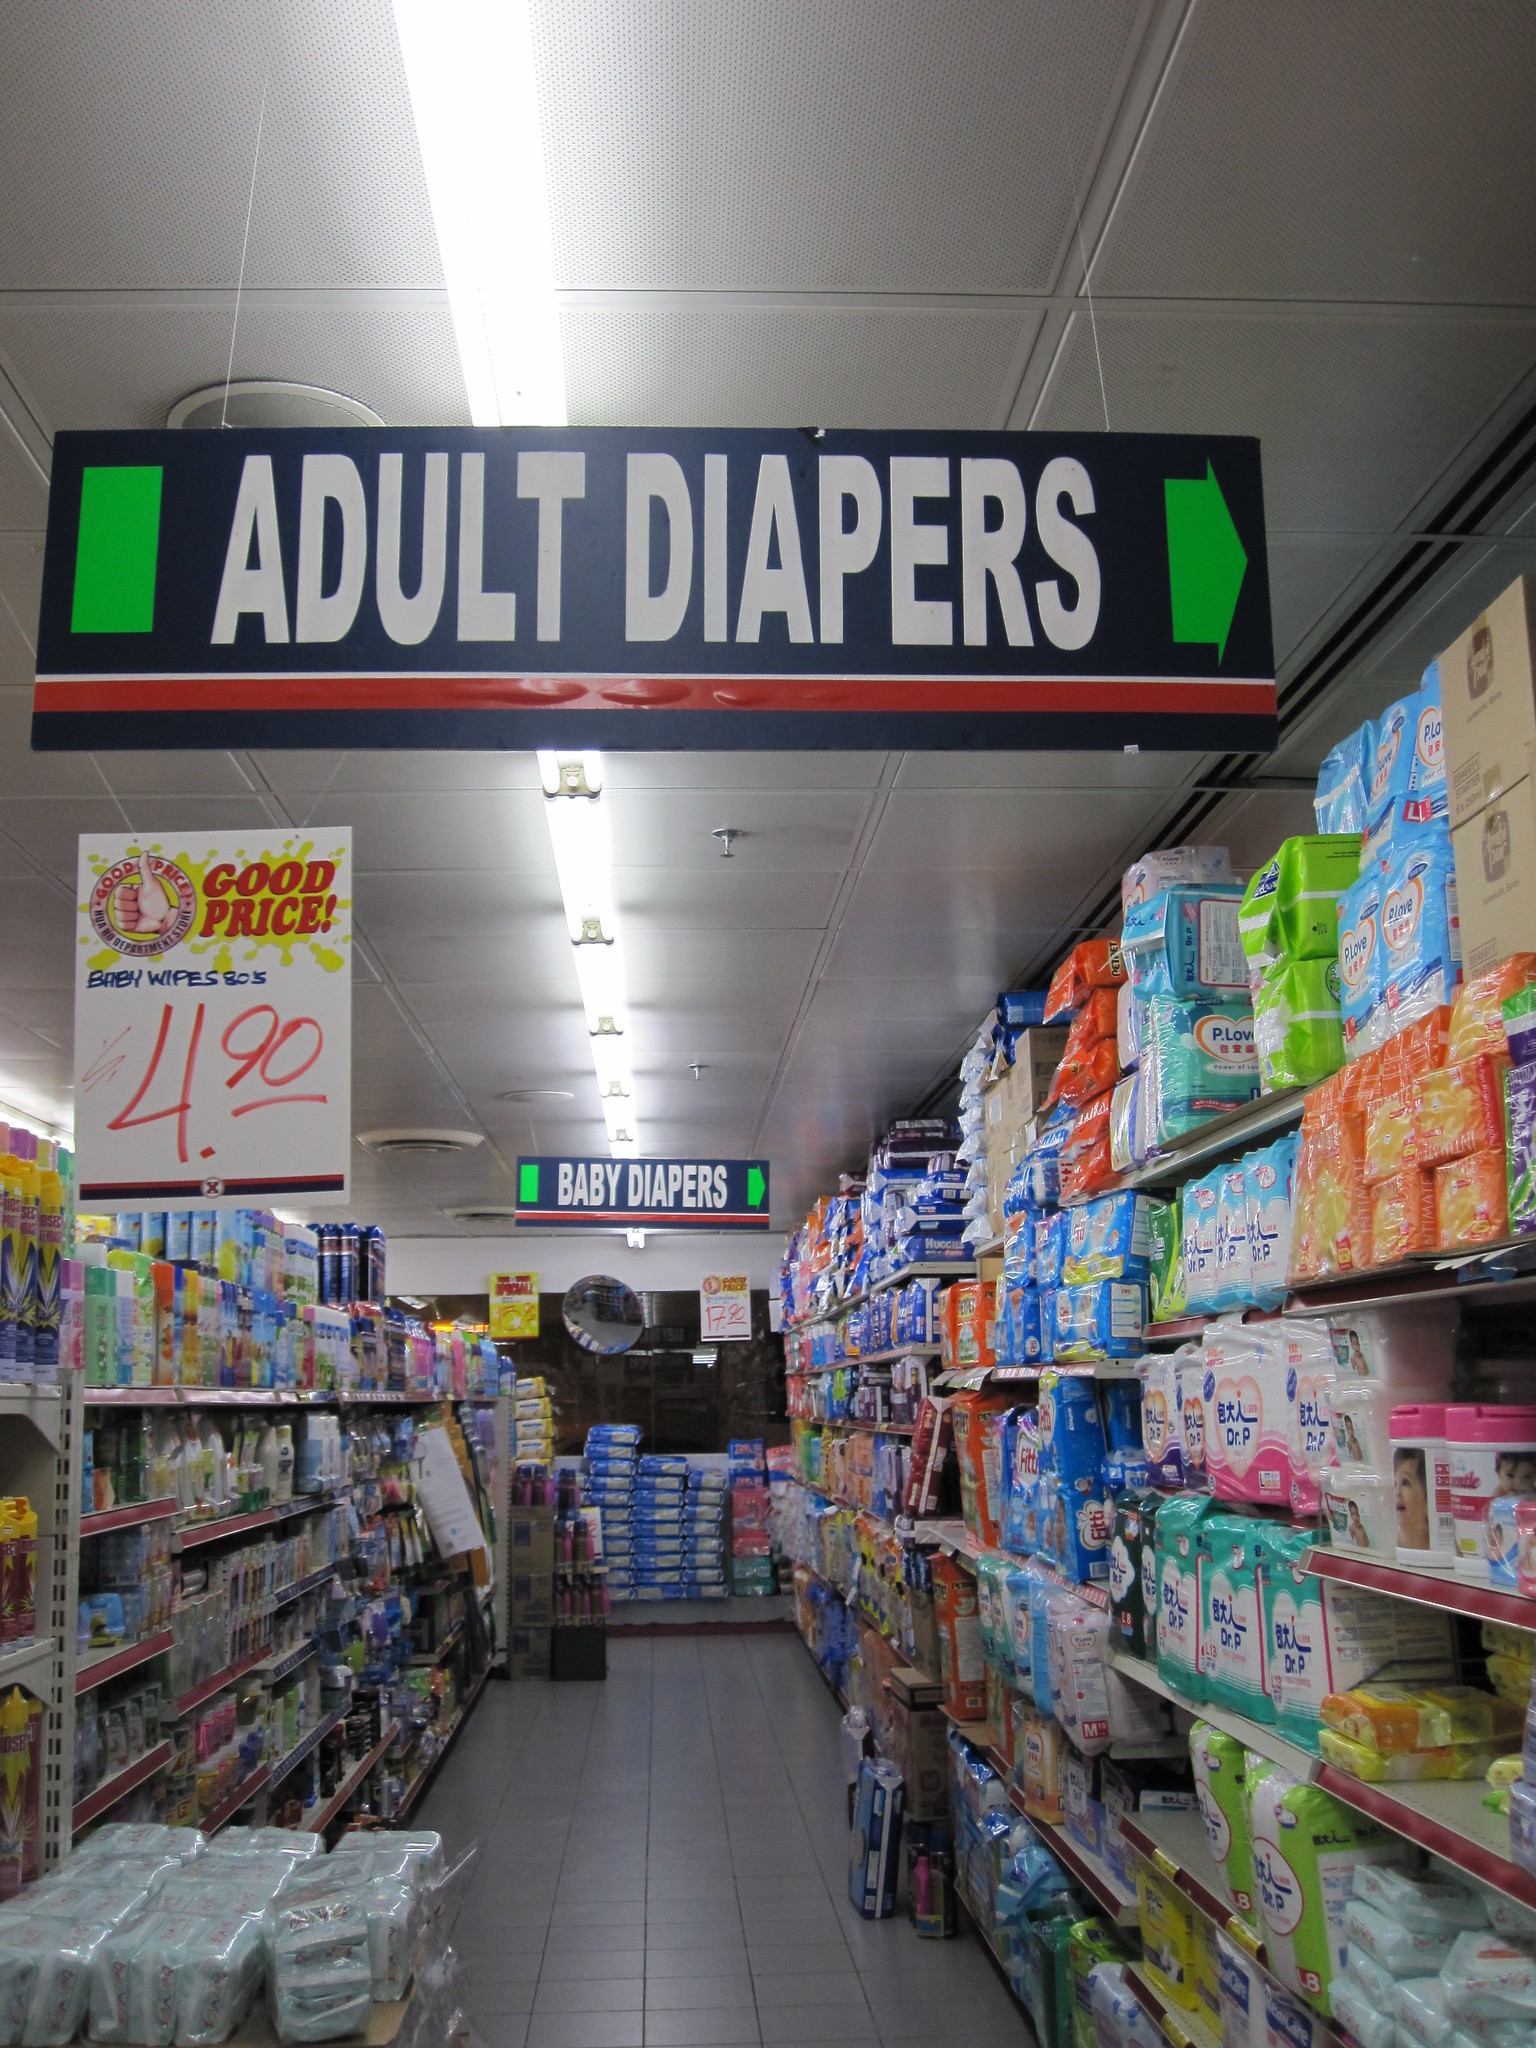 MPs want adult diapers taxed